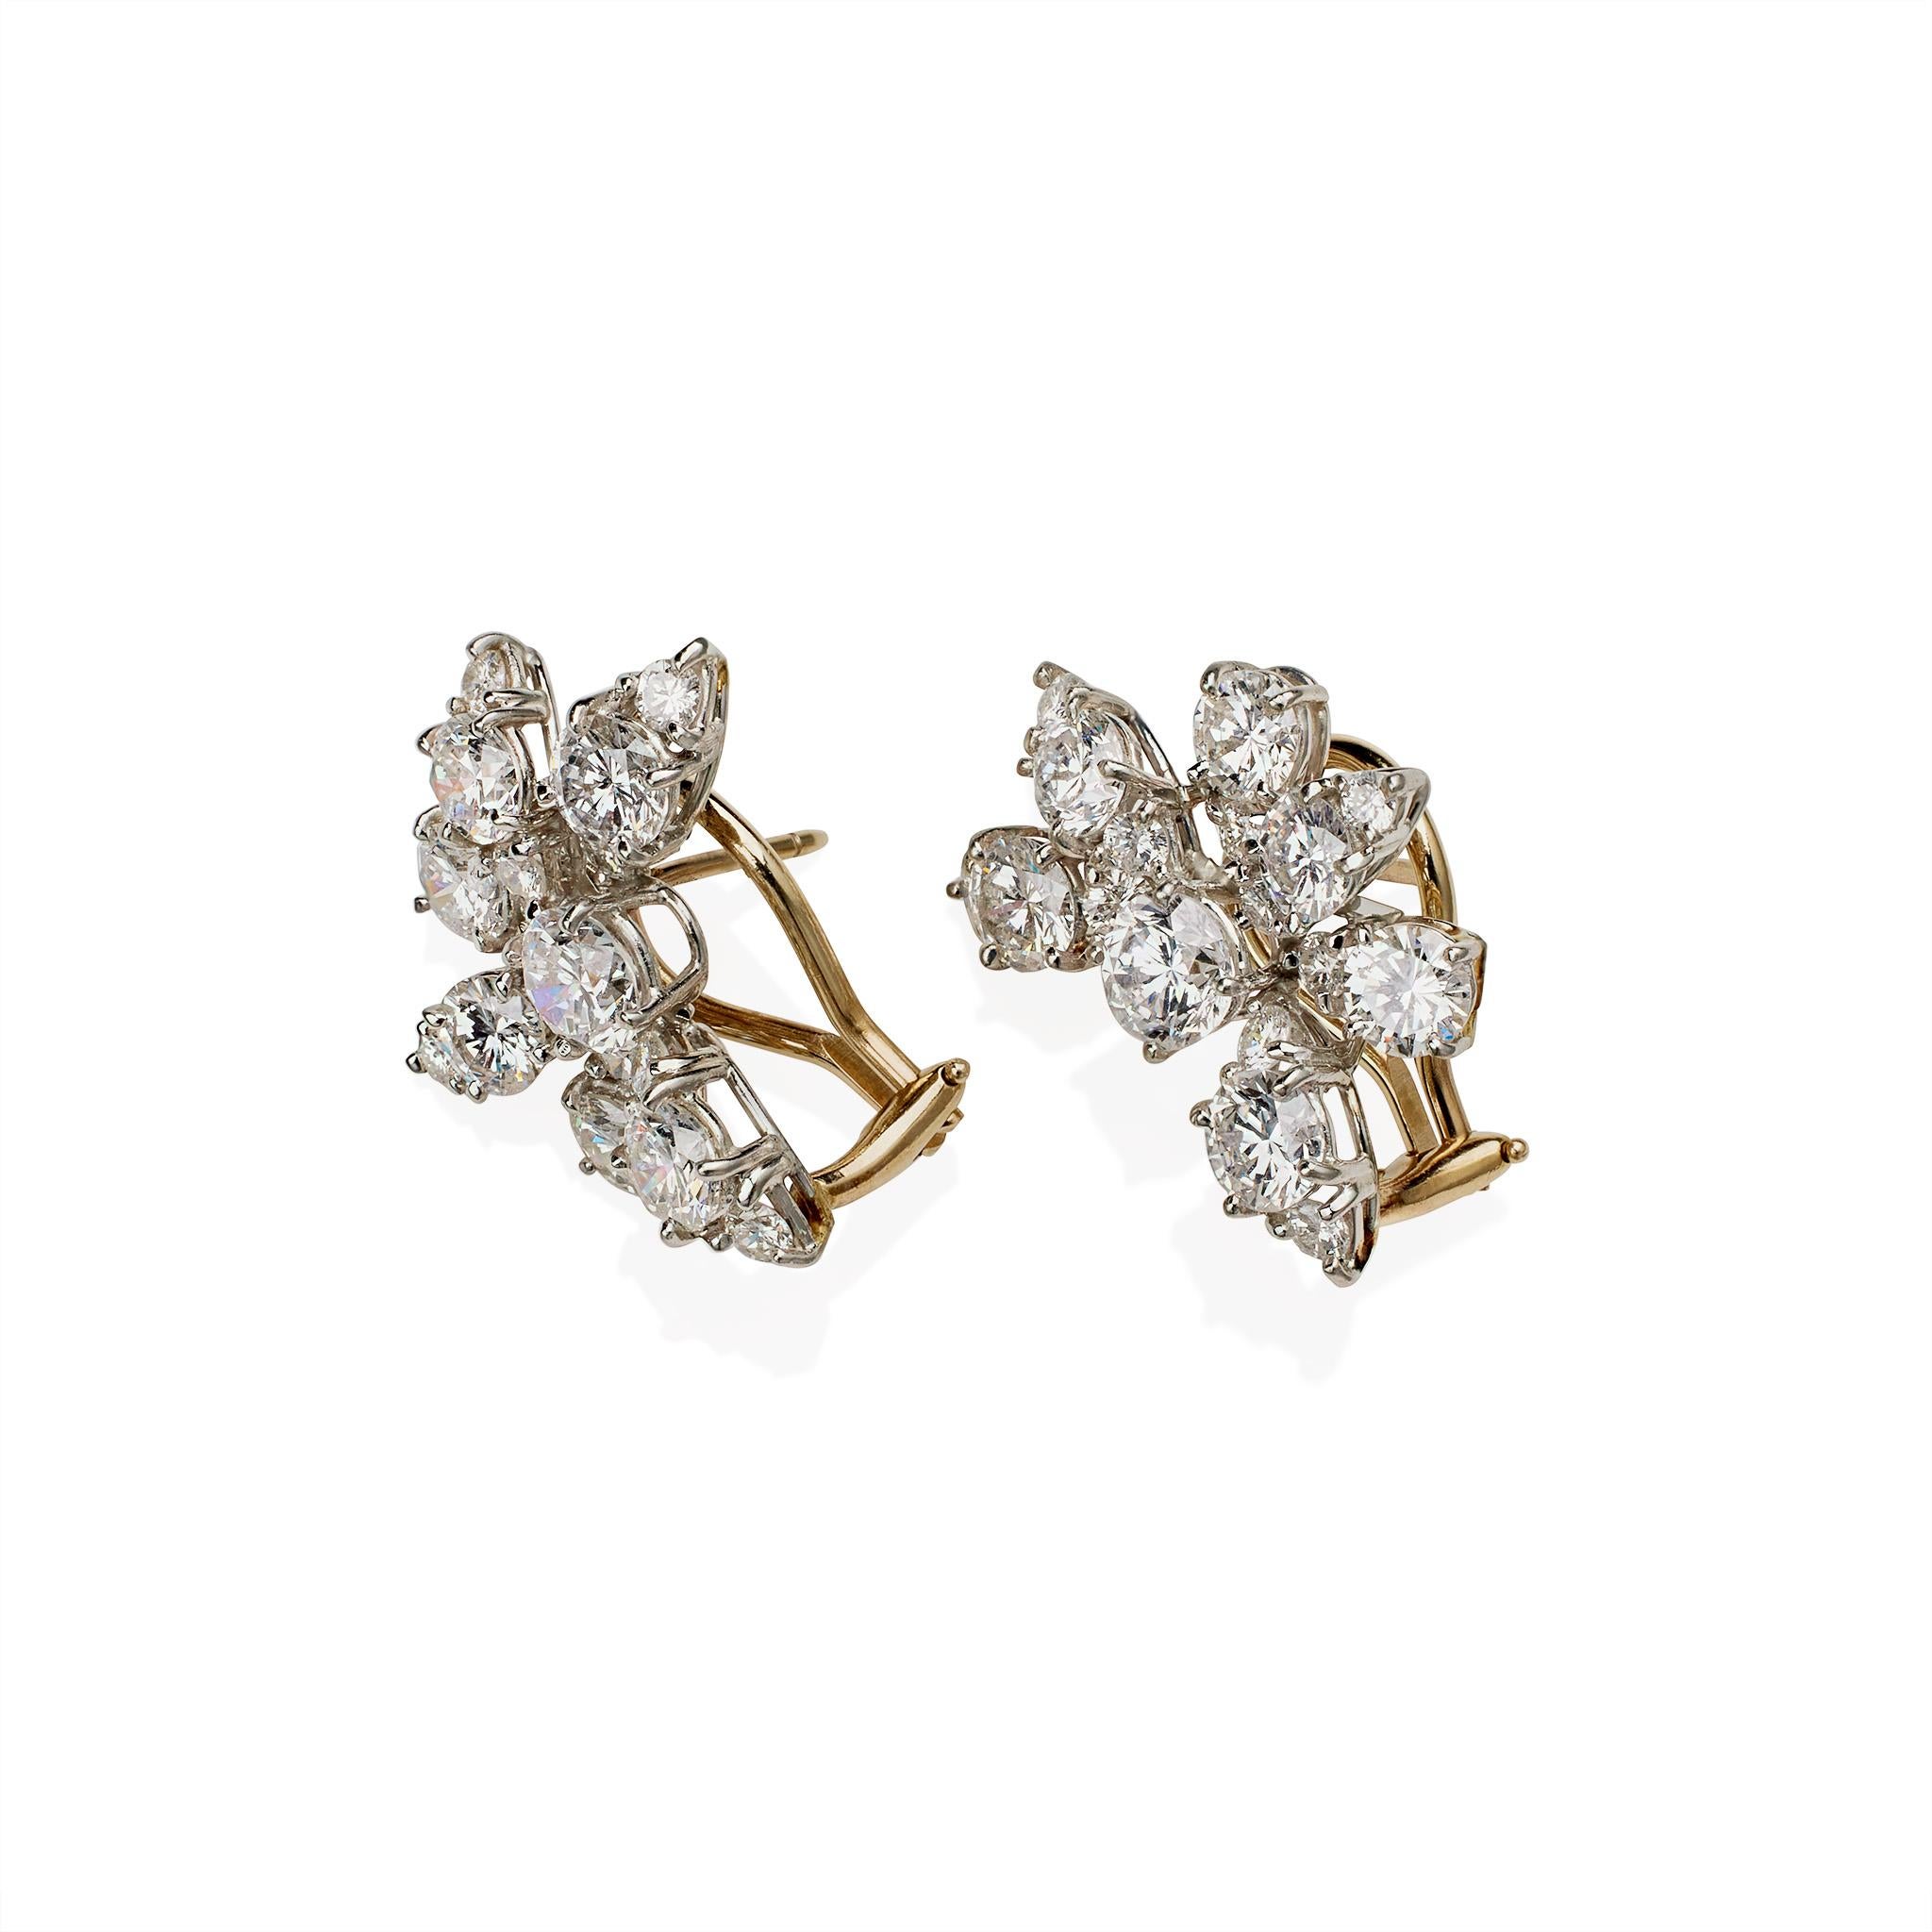 Van Cleef & Arpels 1960s Diamond Clip Earrings In Excellent Condition For Sale In New York, NY